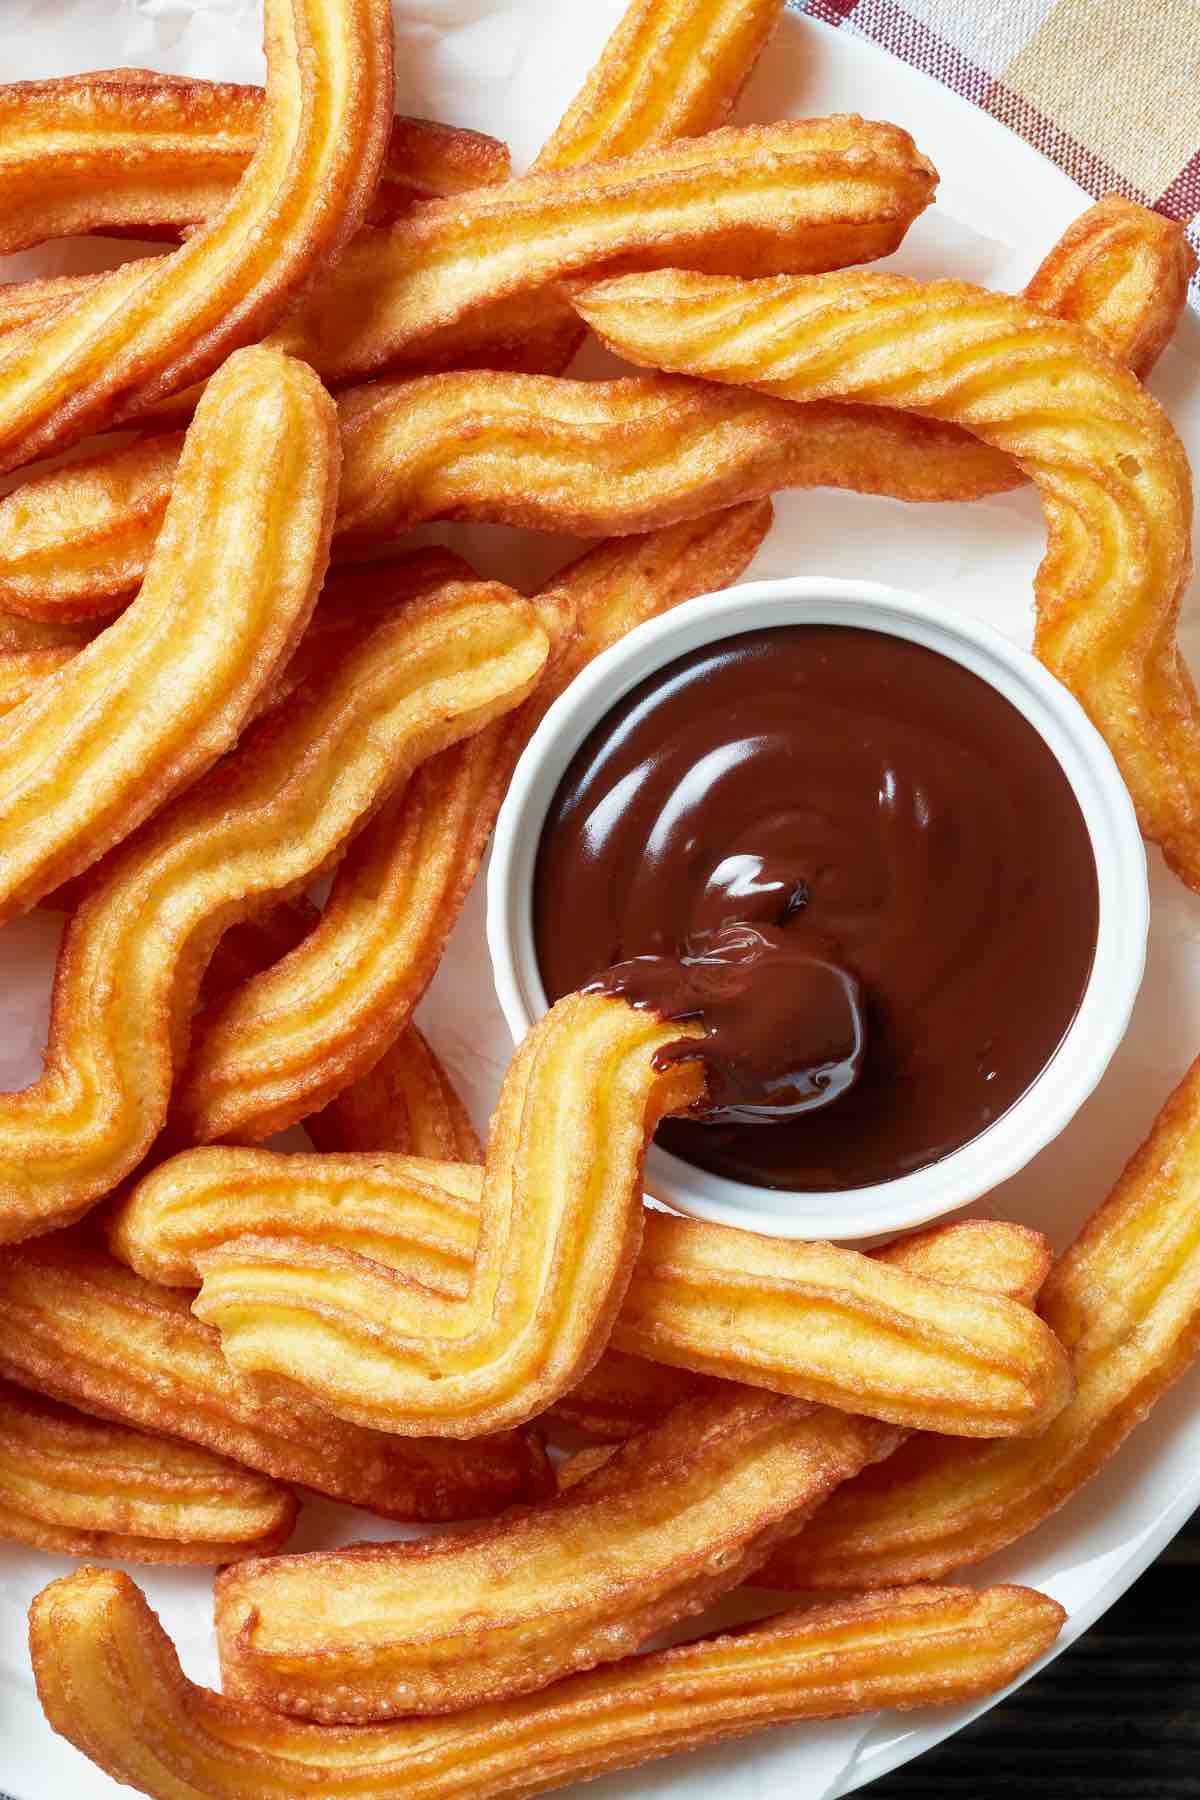 Best authentic Spanish Desserts all in one place! From Spanish rice pudding to churros with chocolate sauce, you can bring a little bit of Spain into your home with these easy and delicious treats.